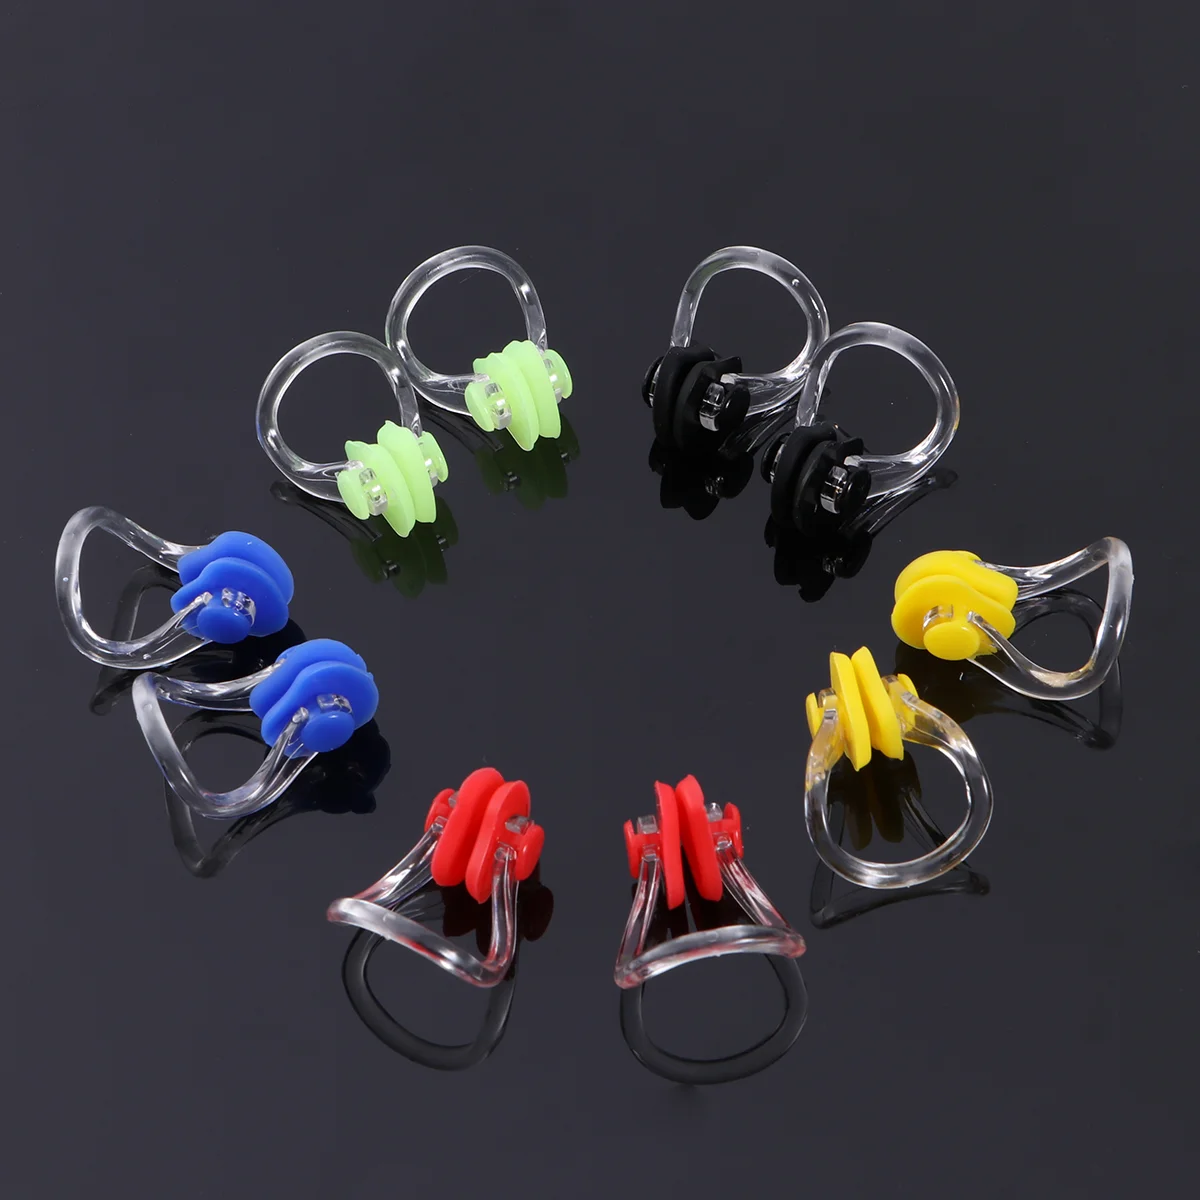 

Nose Clip Swimming Clips Gaskets for The Ears against Water Plugs Waterproof Non-slip Nose Clips